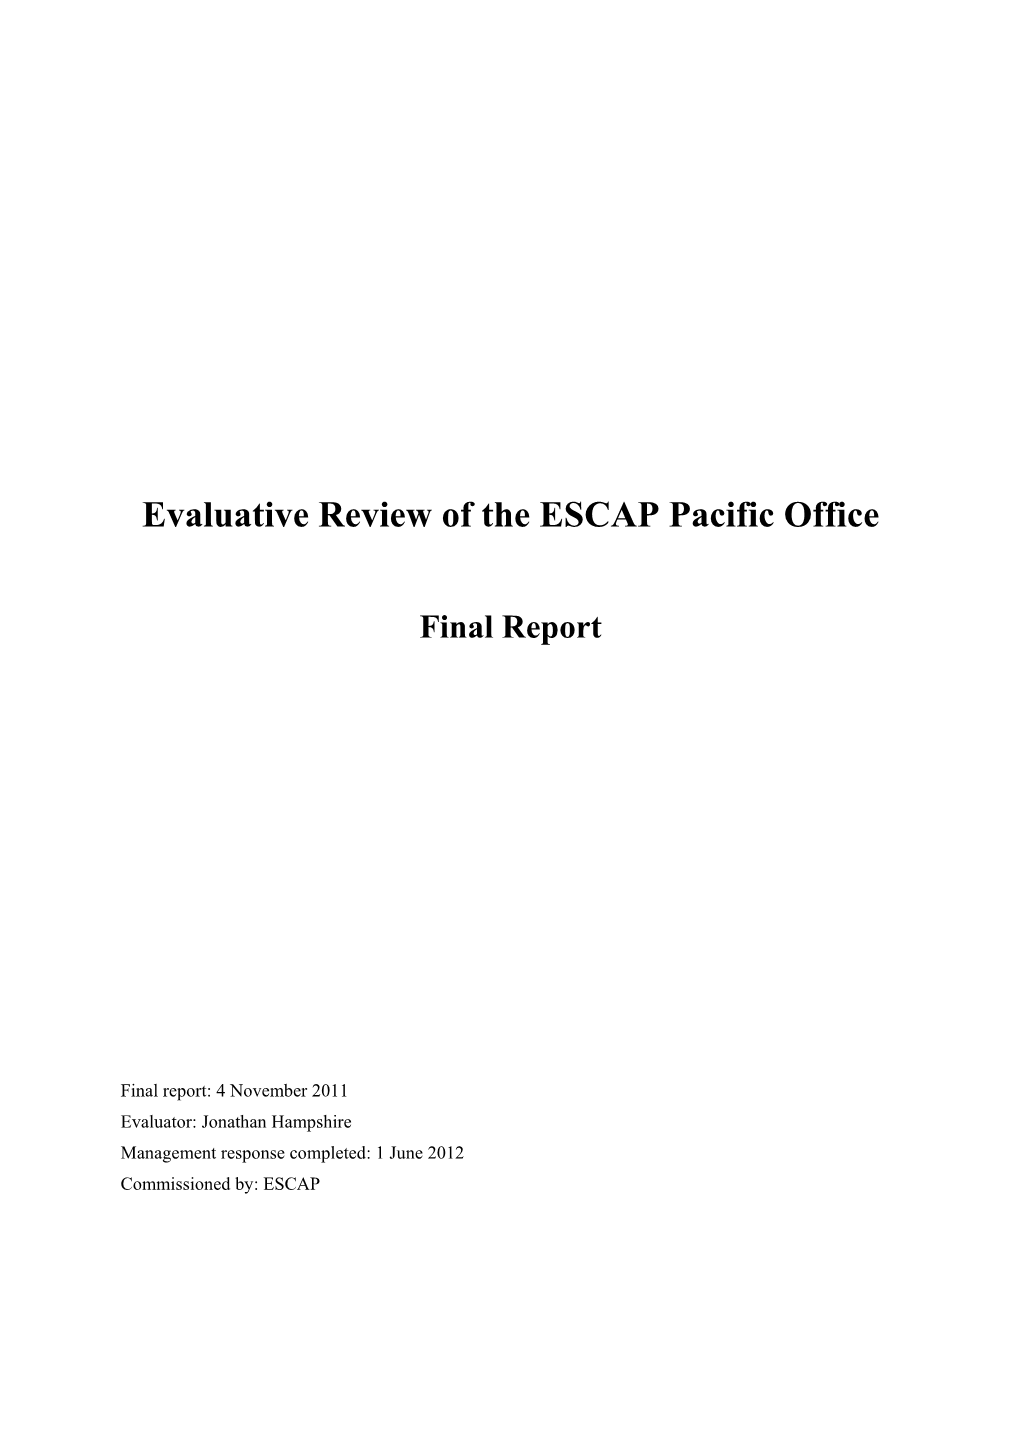 Evaluation of the ESCAP Pacific Office